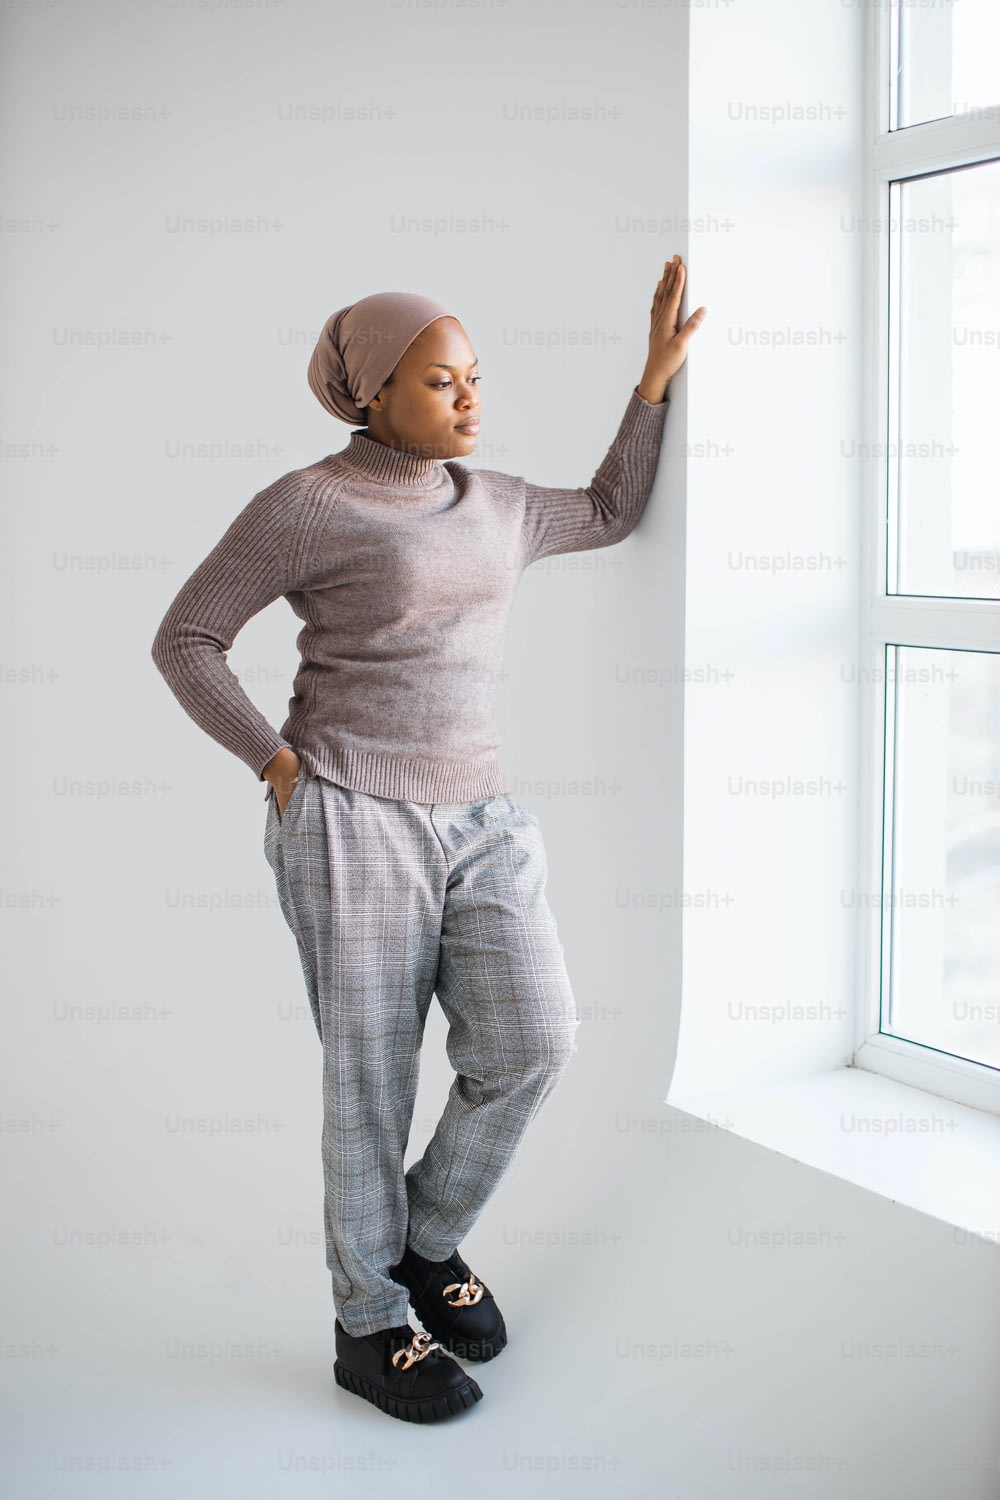 Attractive african american muslim woman in headscarf and casual clothes standing in studio with white background and looking at window. Concept of people and lifestyles.